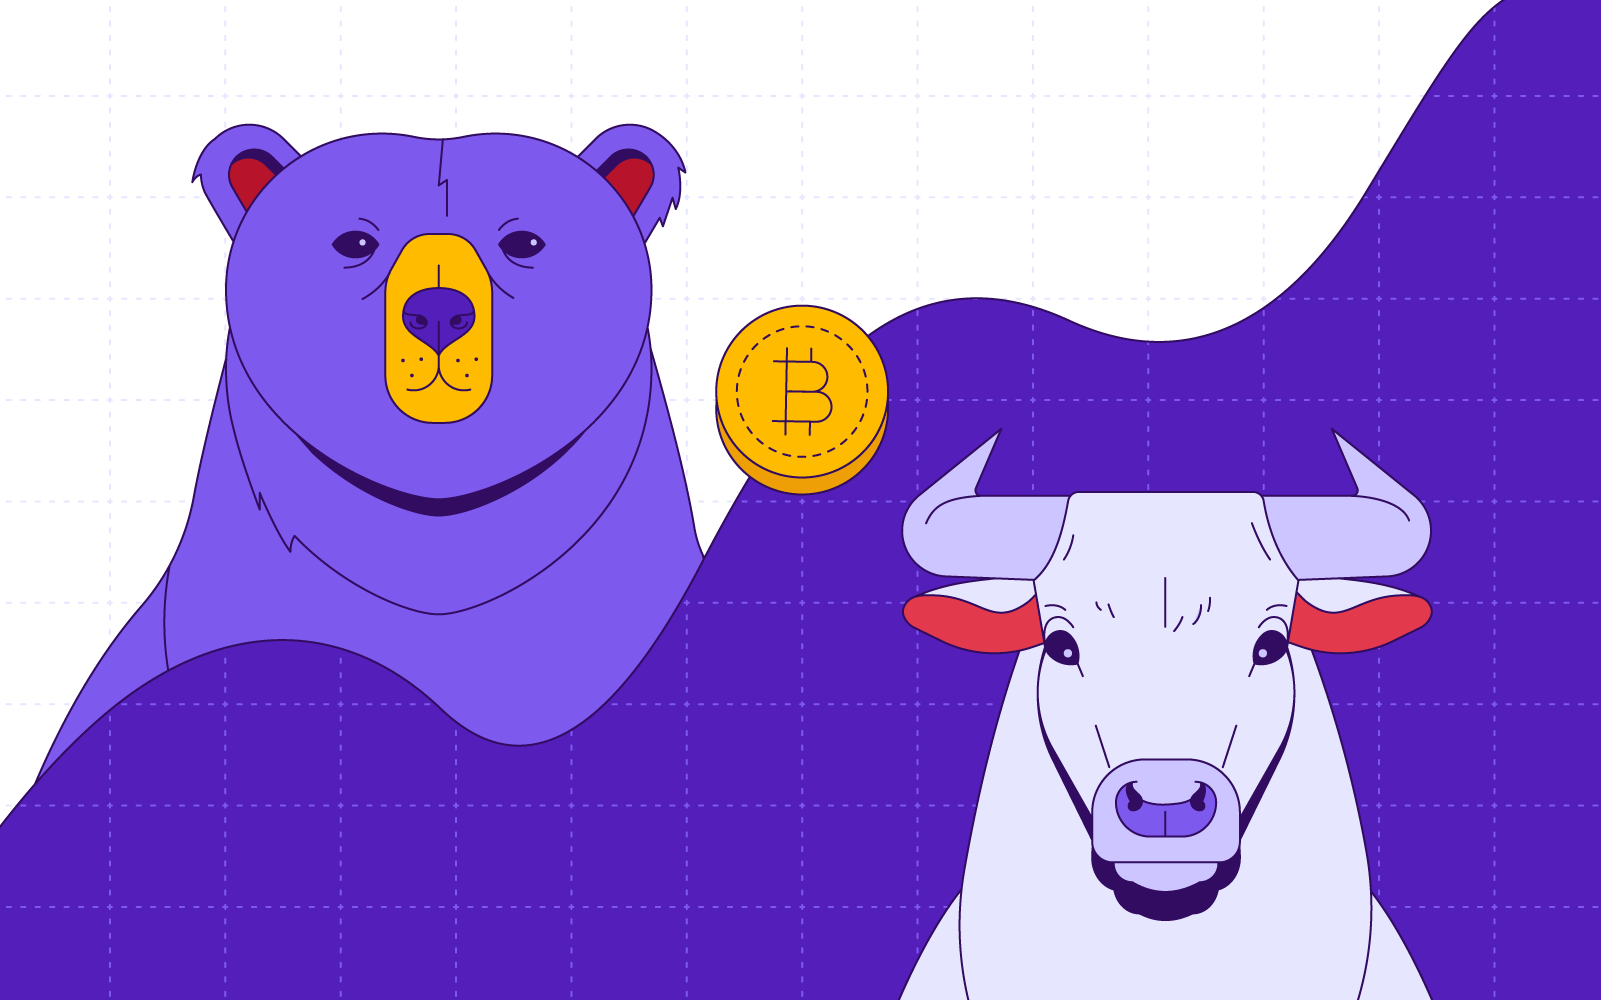 A Guide on the Bear and Bull Crypto Markets